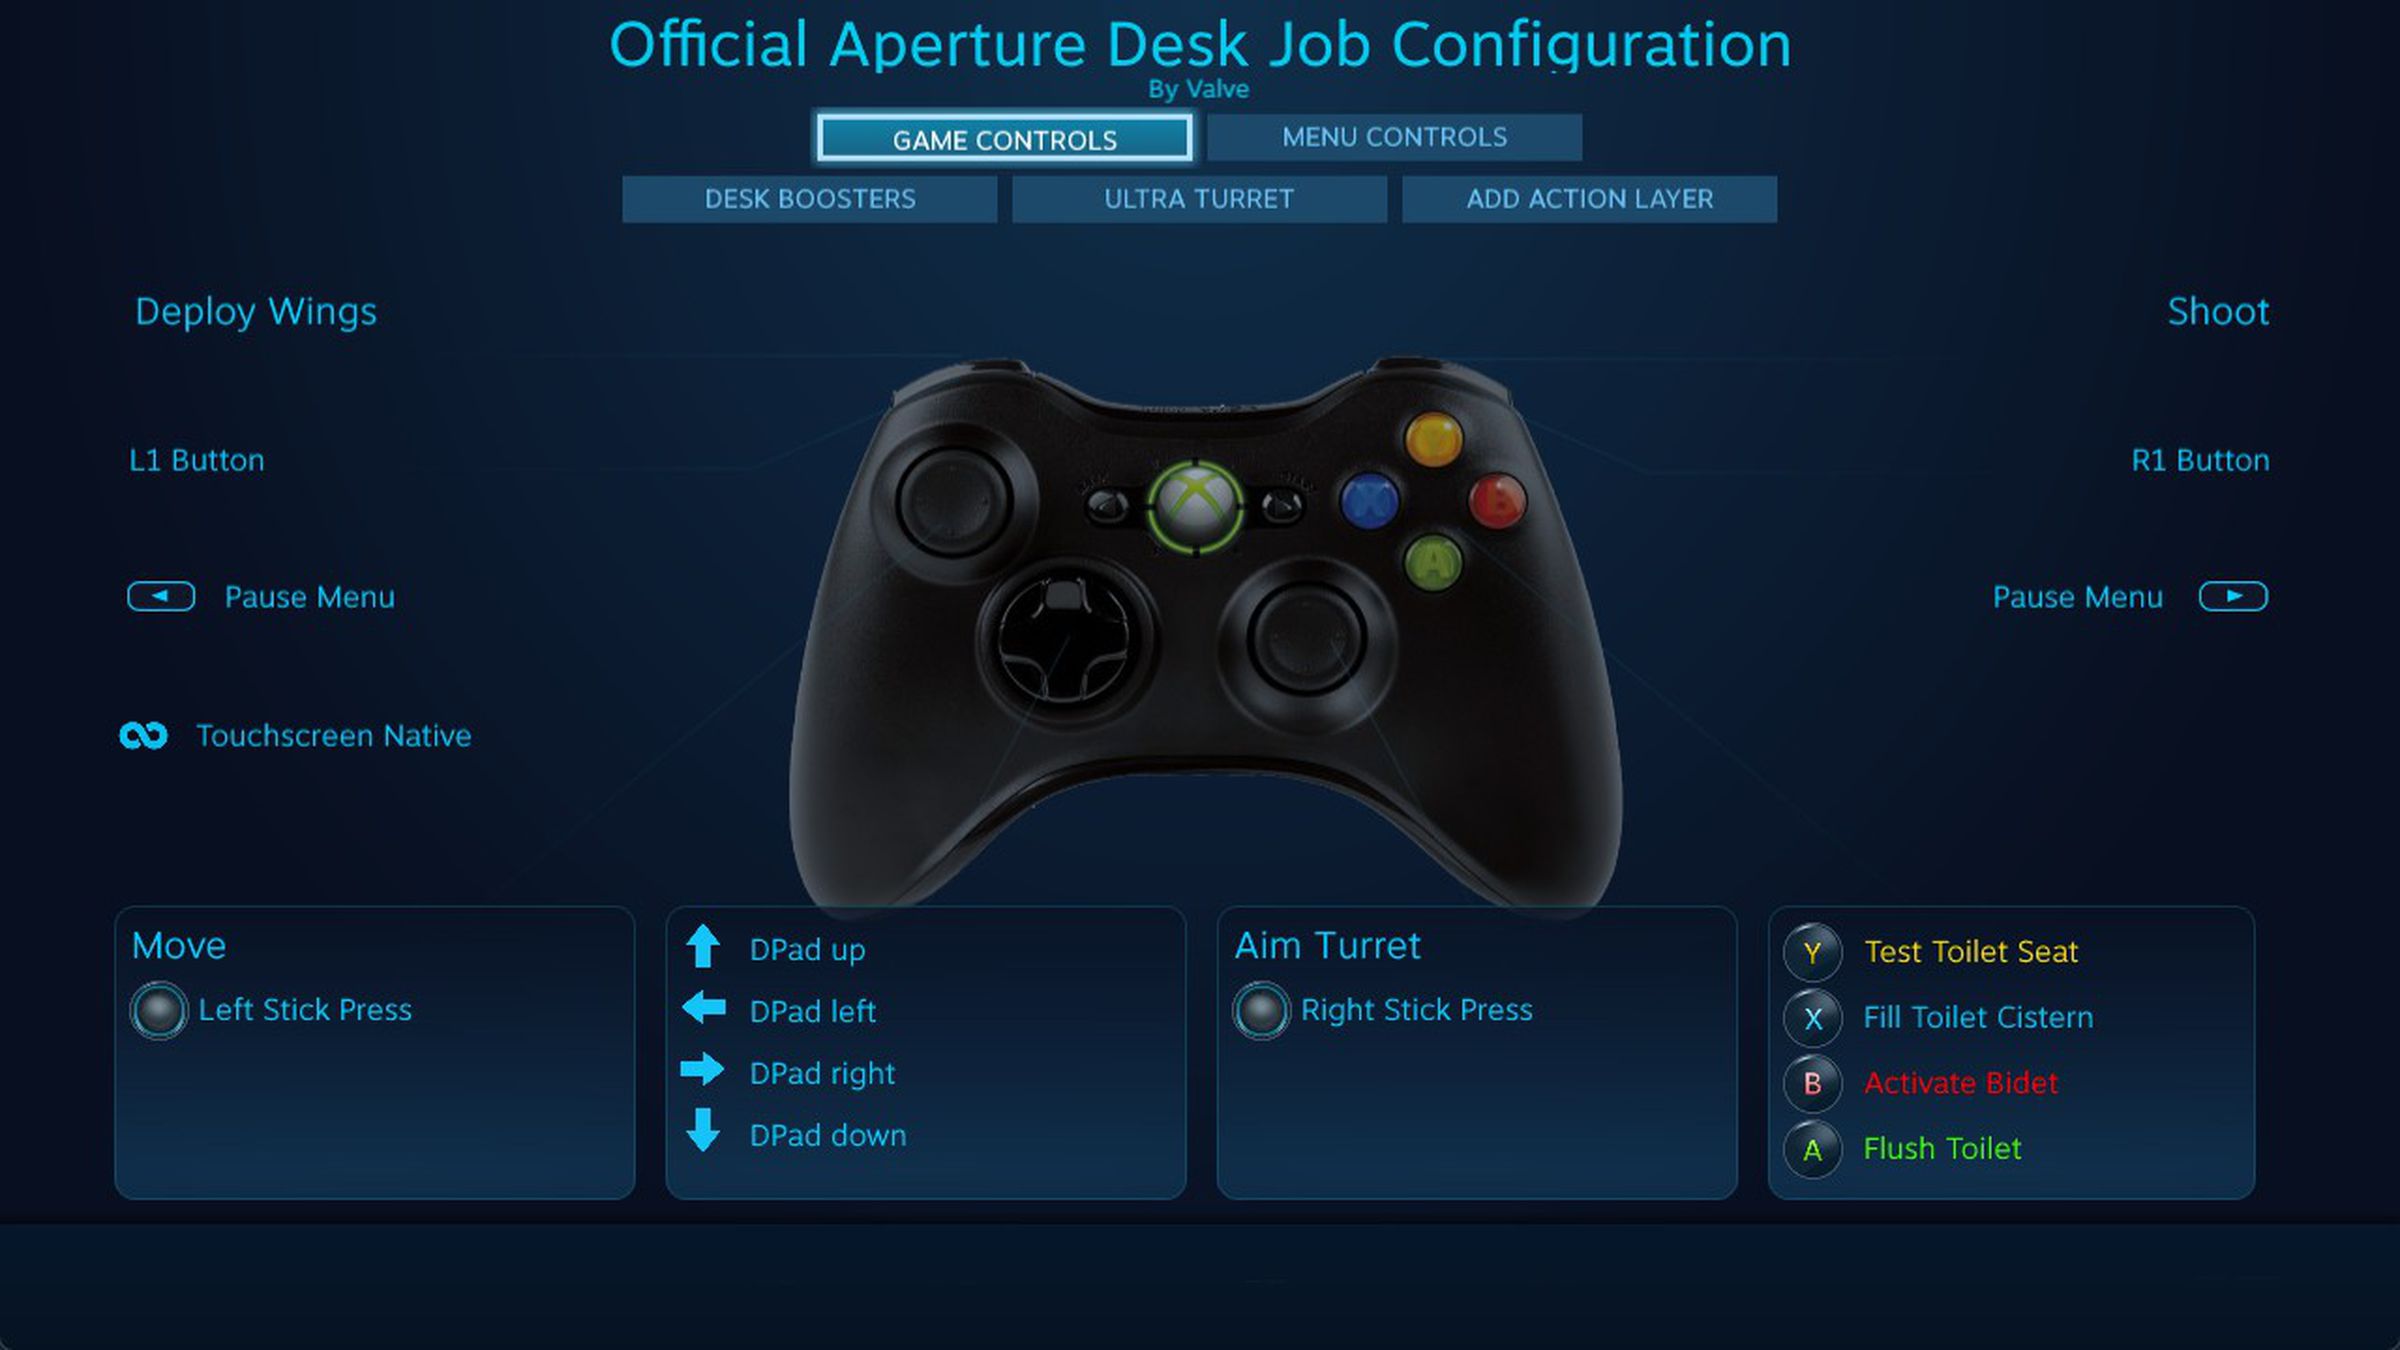 The Xbox 360 control scheme, with minor spoilers if you look closely.